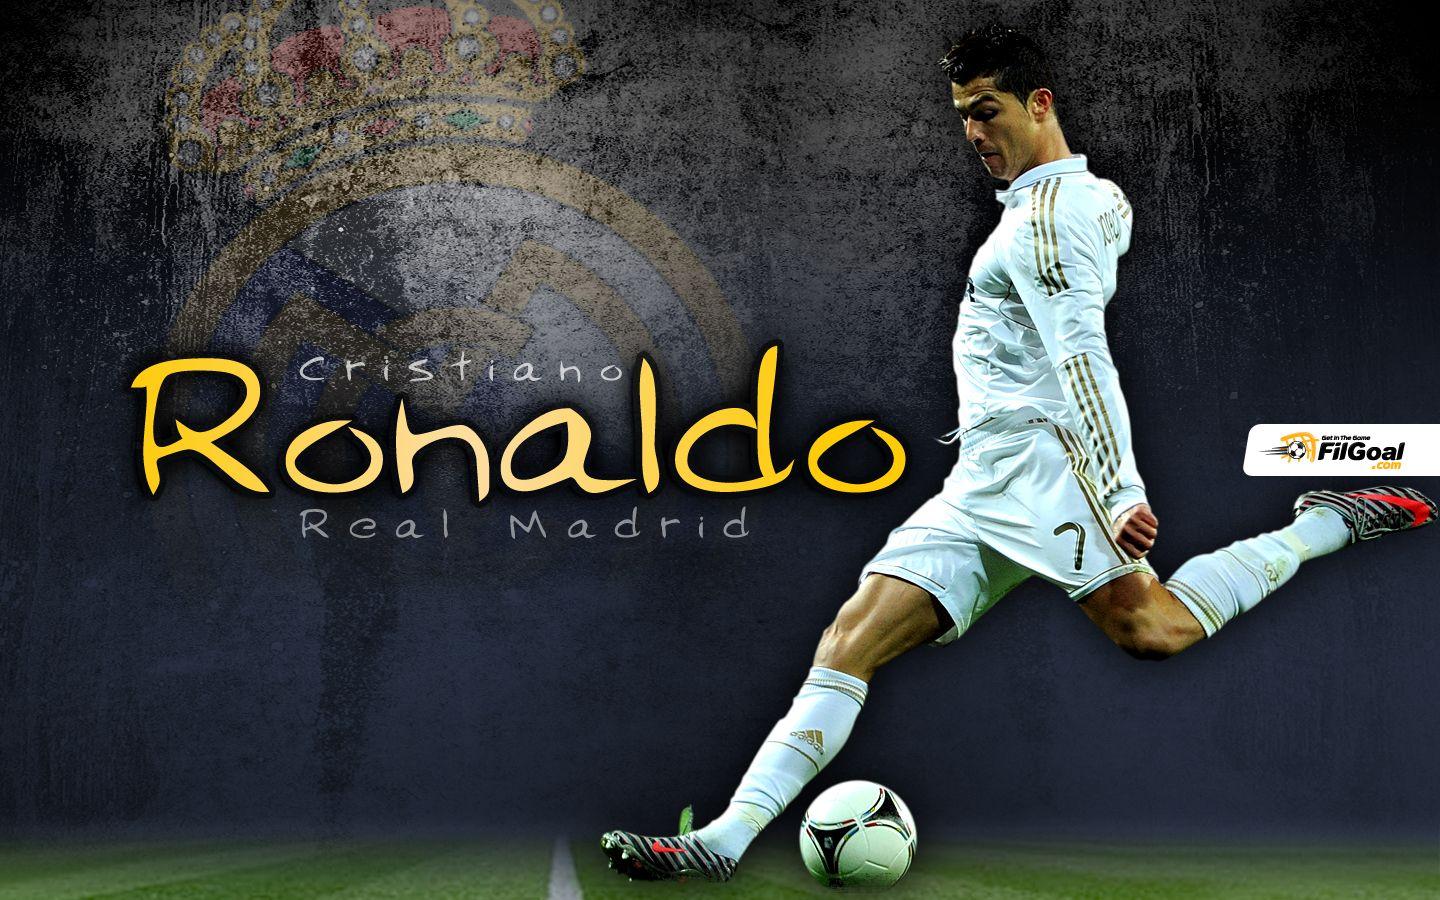 Cristiano Ronaldo. Background screen and 32 goals in two minutes